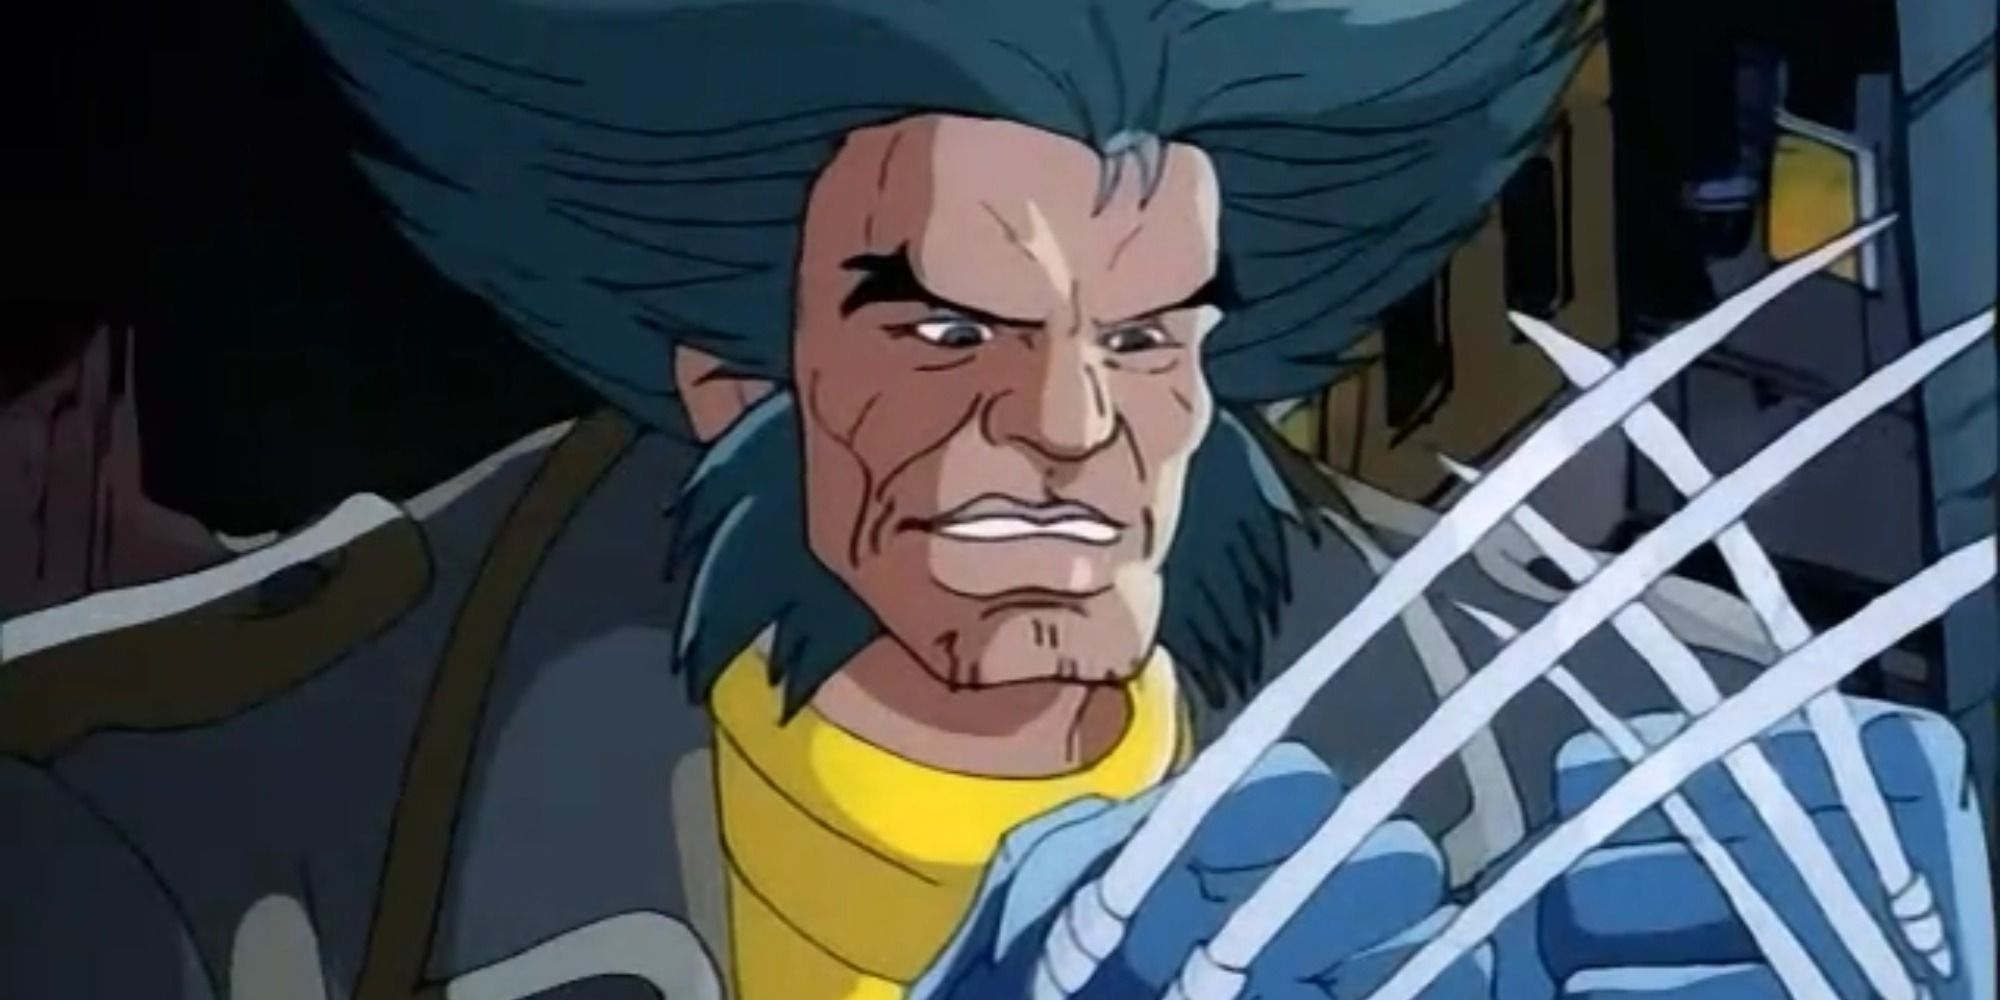 Wolverine pops his claws in Days Of Futures Past animated TV episode.